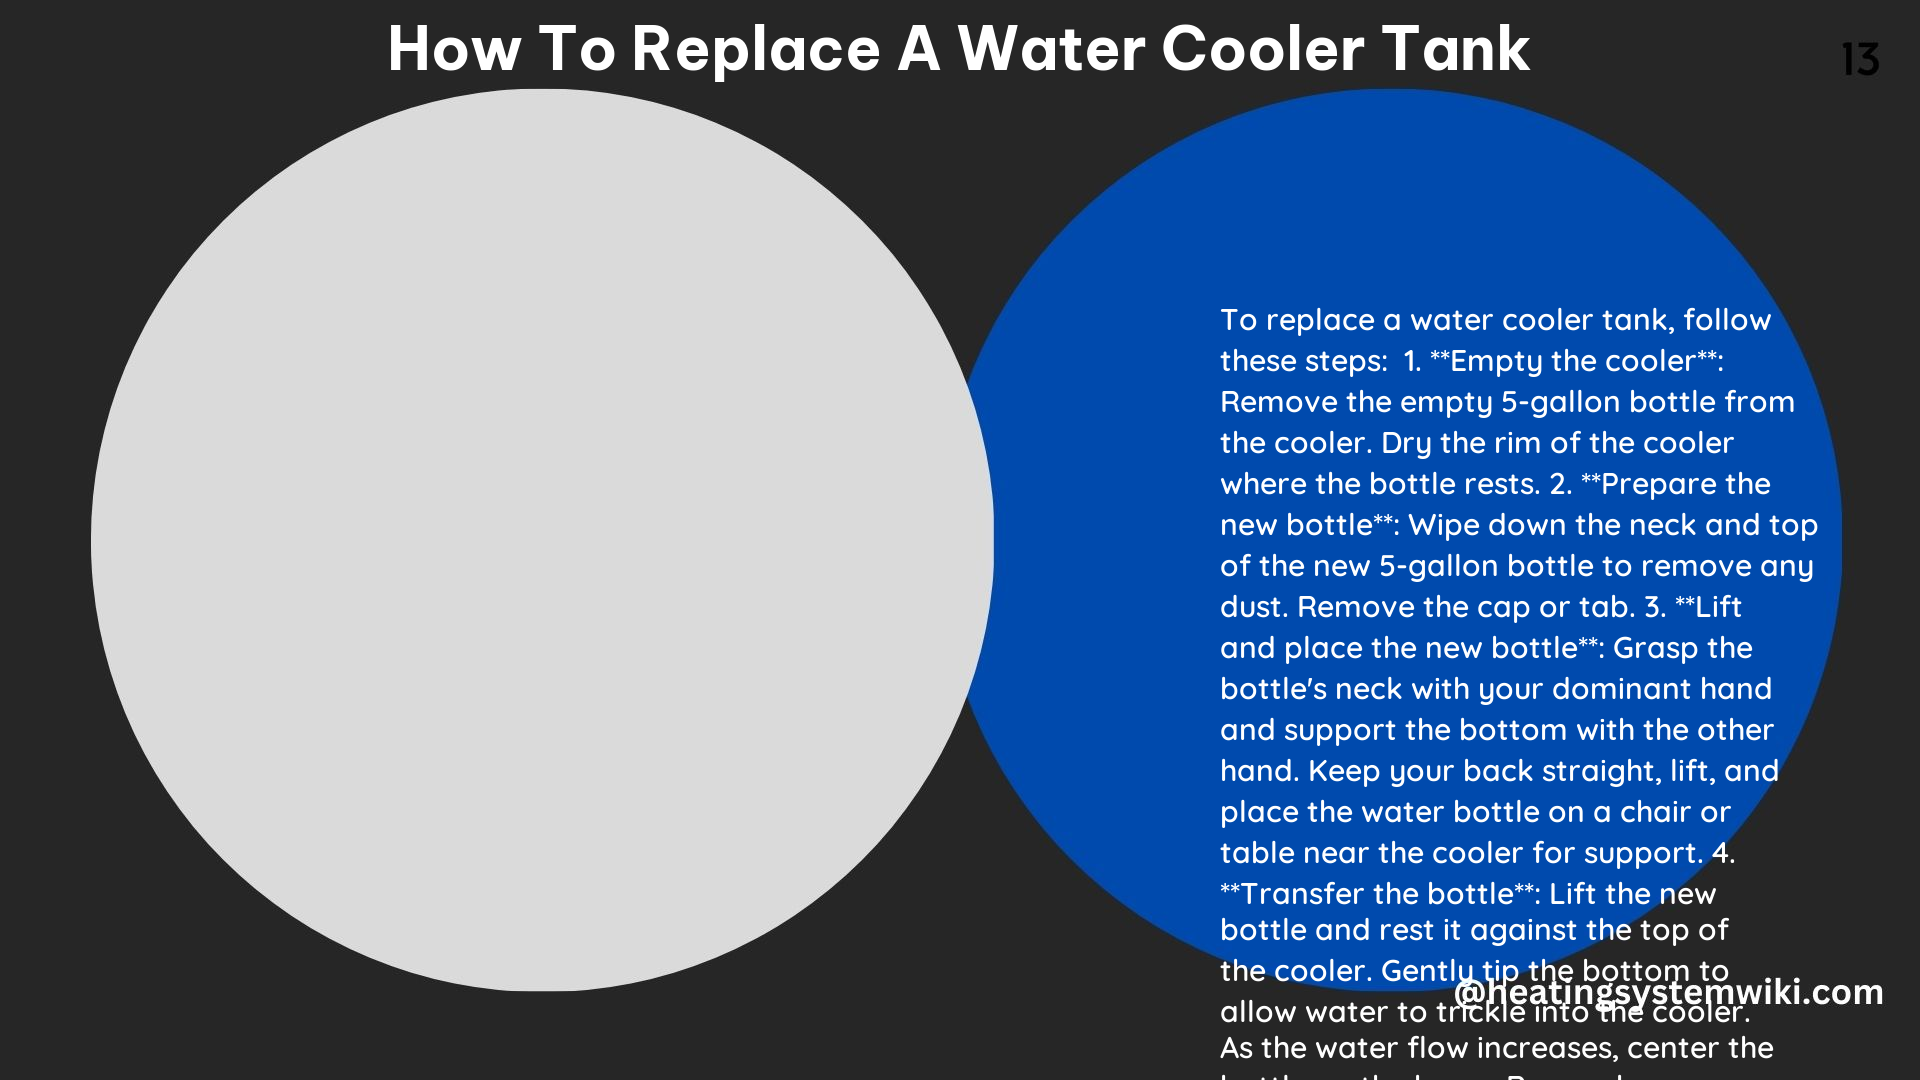 How to Replace a Water Cooler Tank